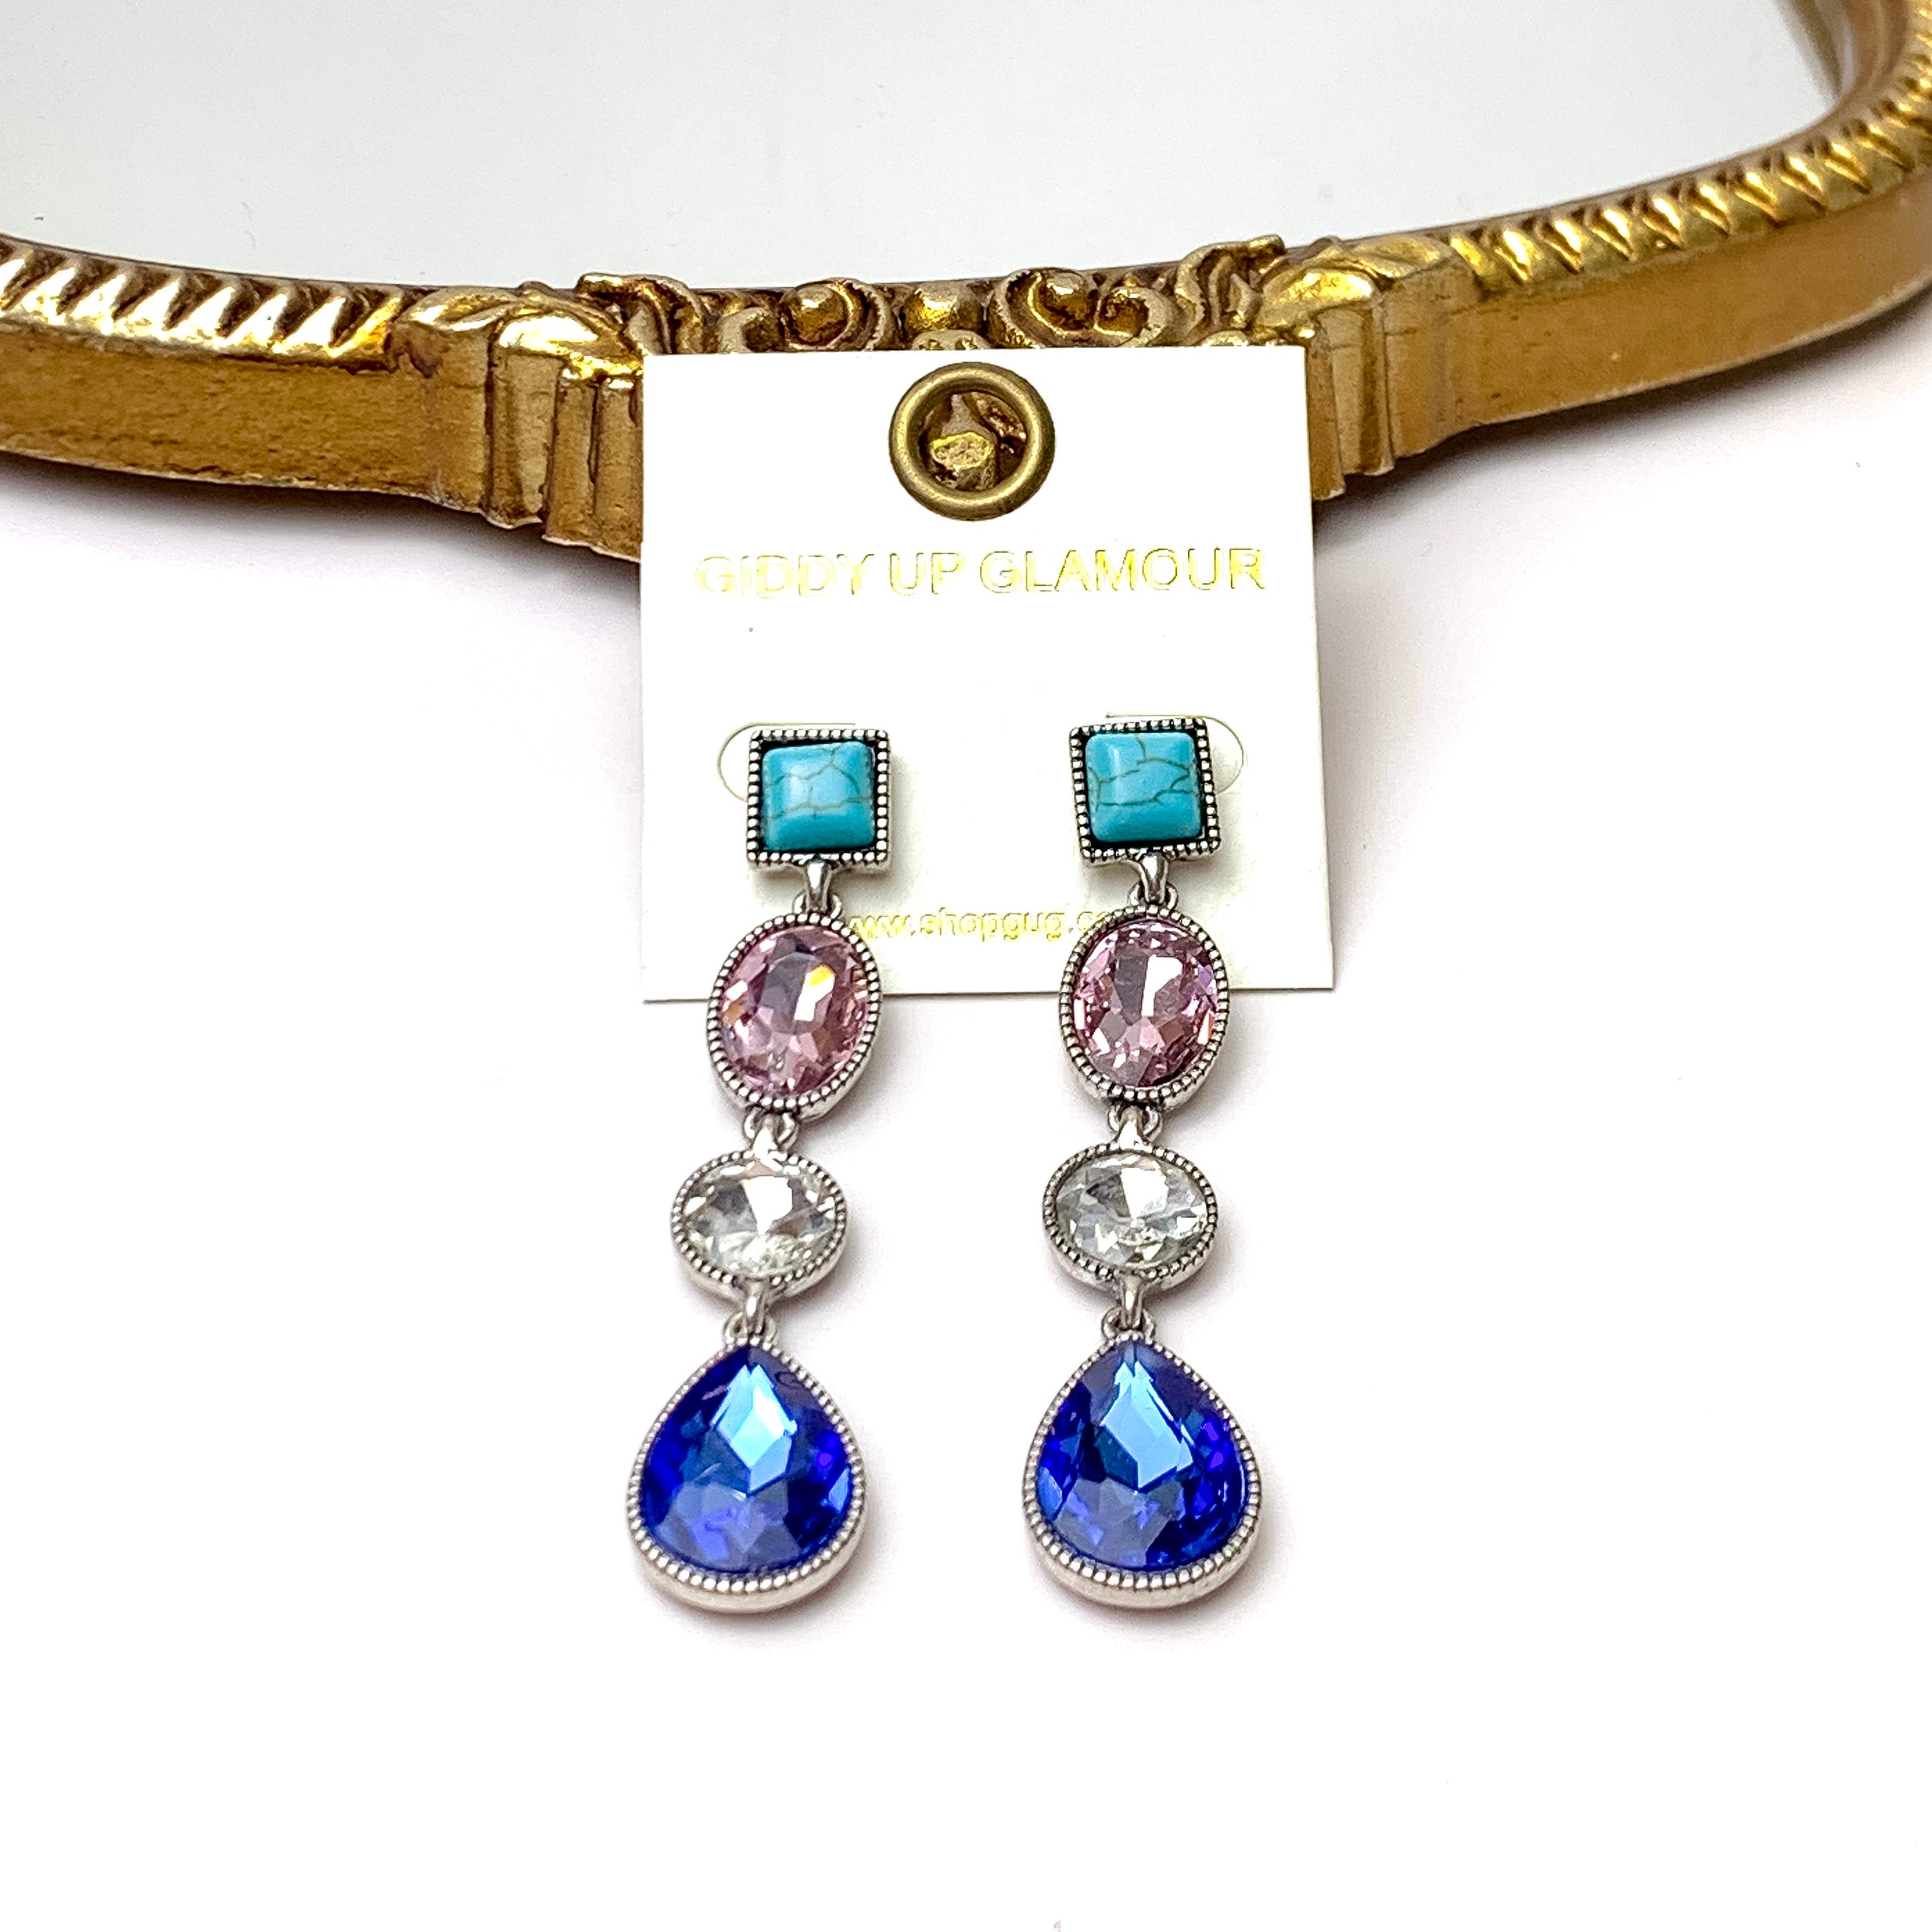 4 Tier Square Post Faux Turquoise and Light Pink and Blue Crystal Dangle Earrings - Giddy Up Glamour Boutique